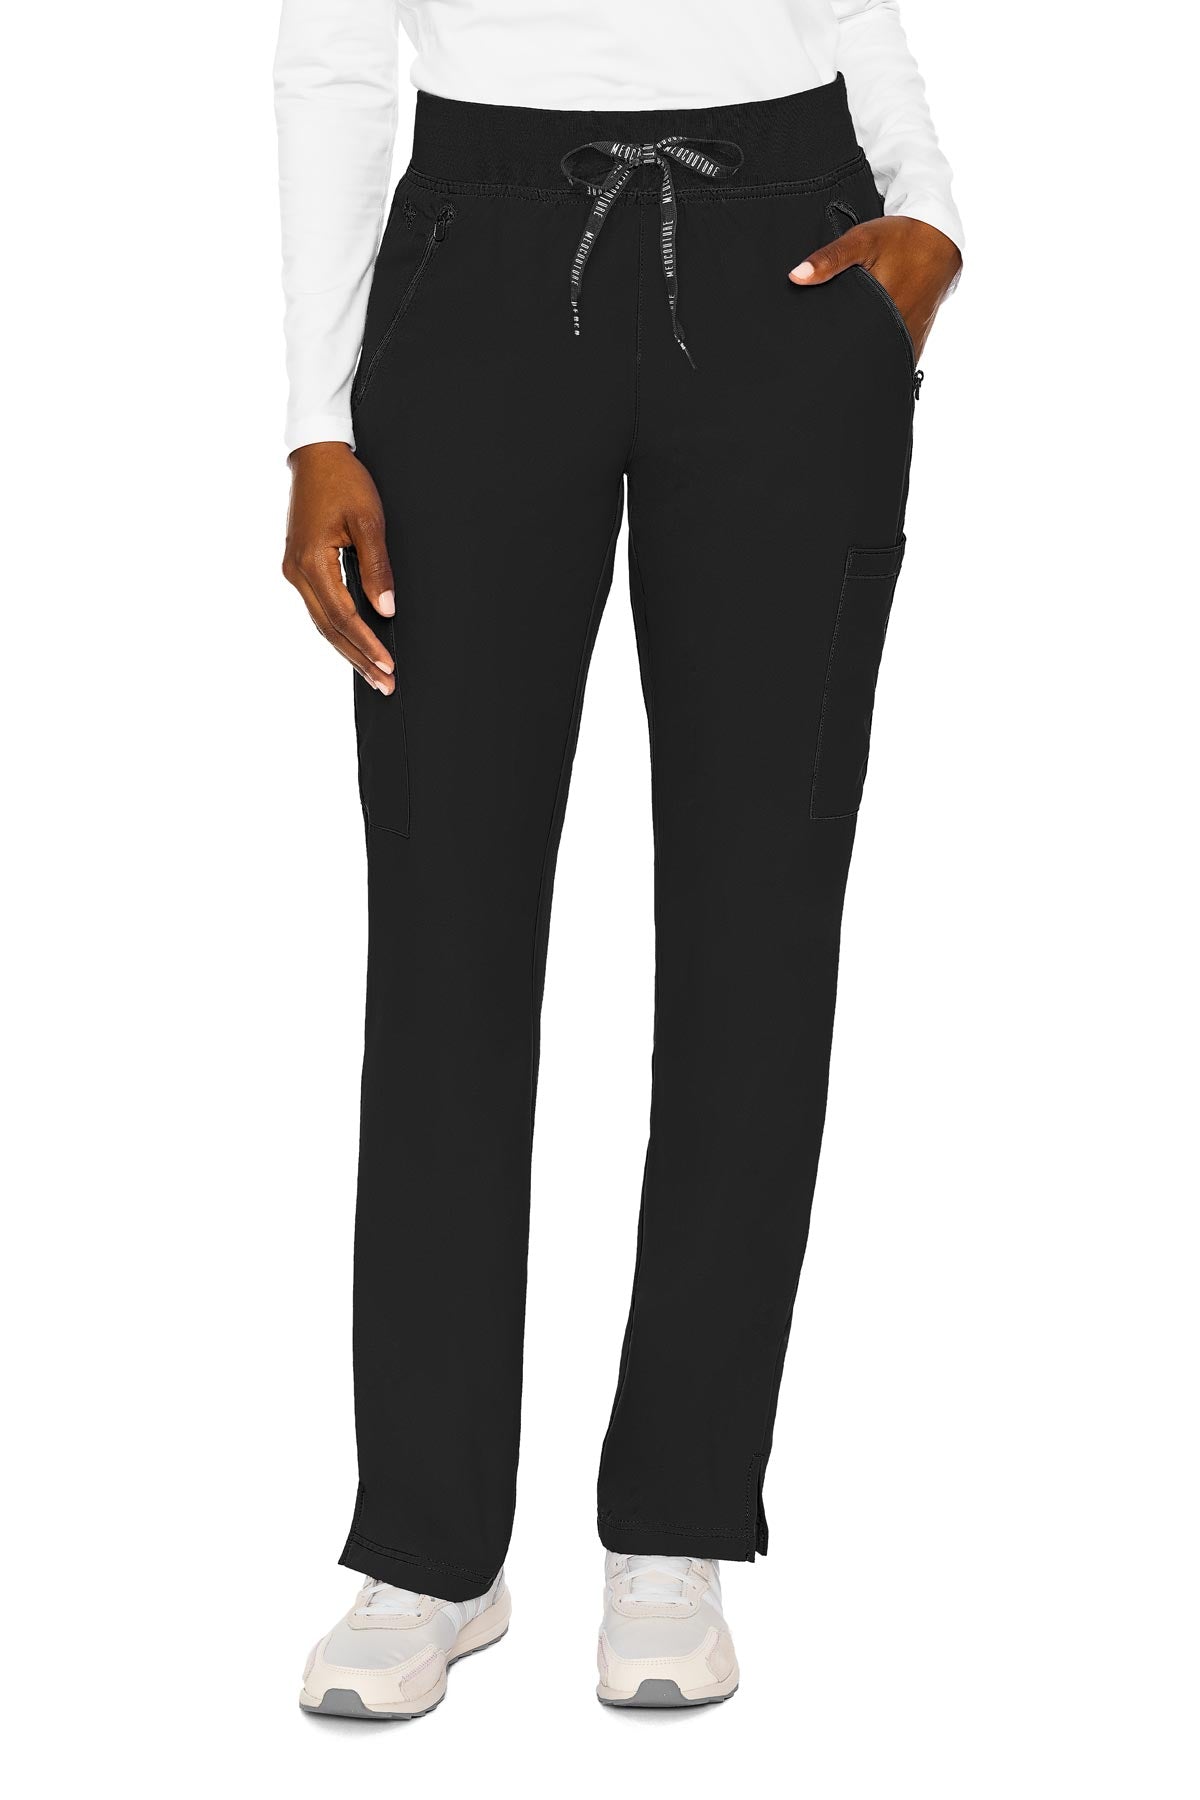 2702 Med Couture Insight Women's Zipper Pant